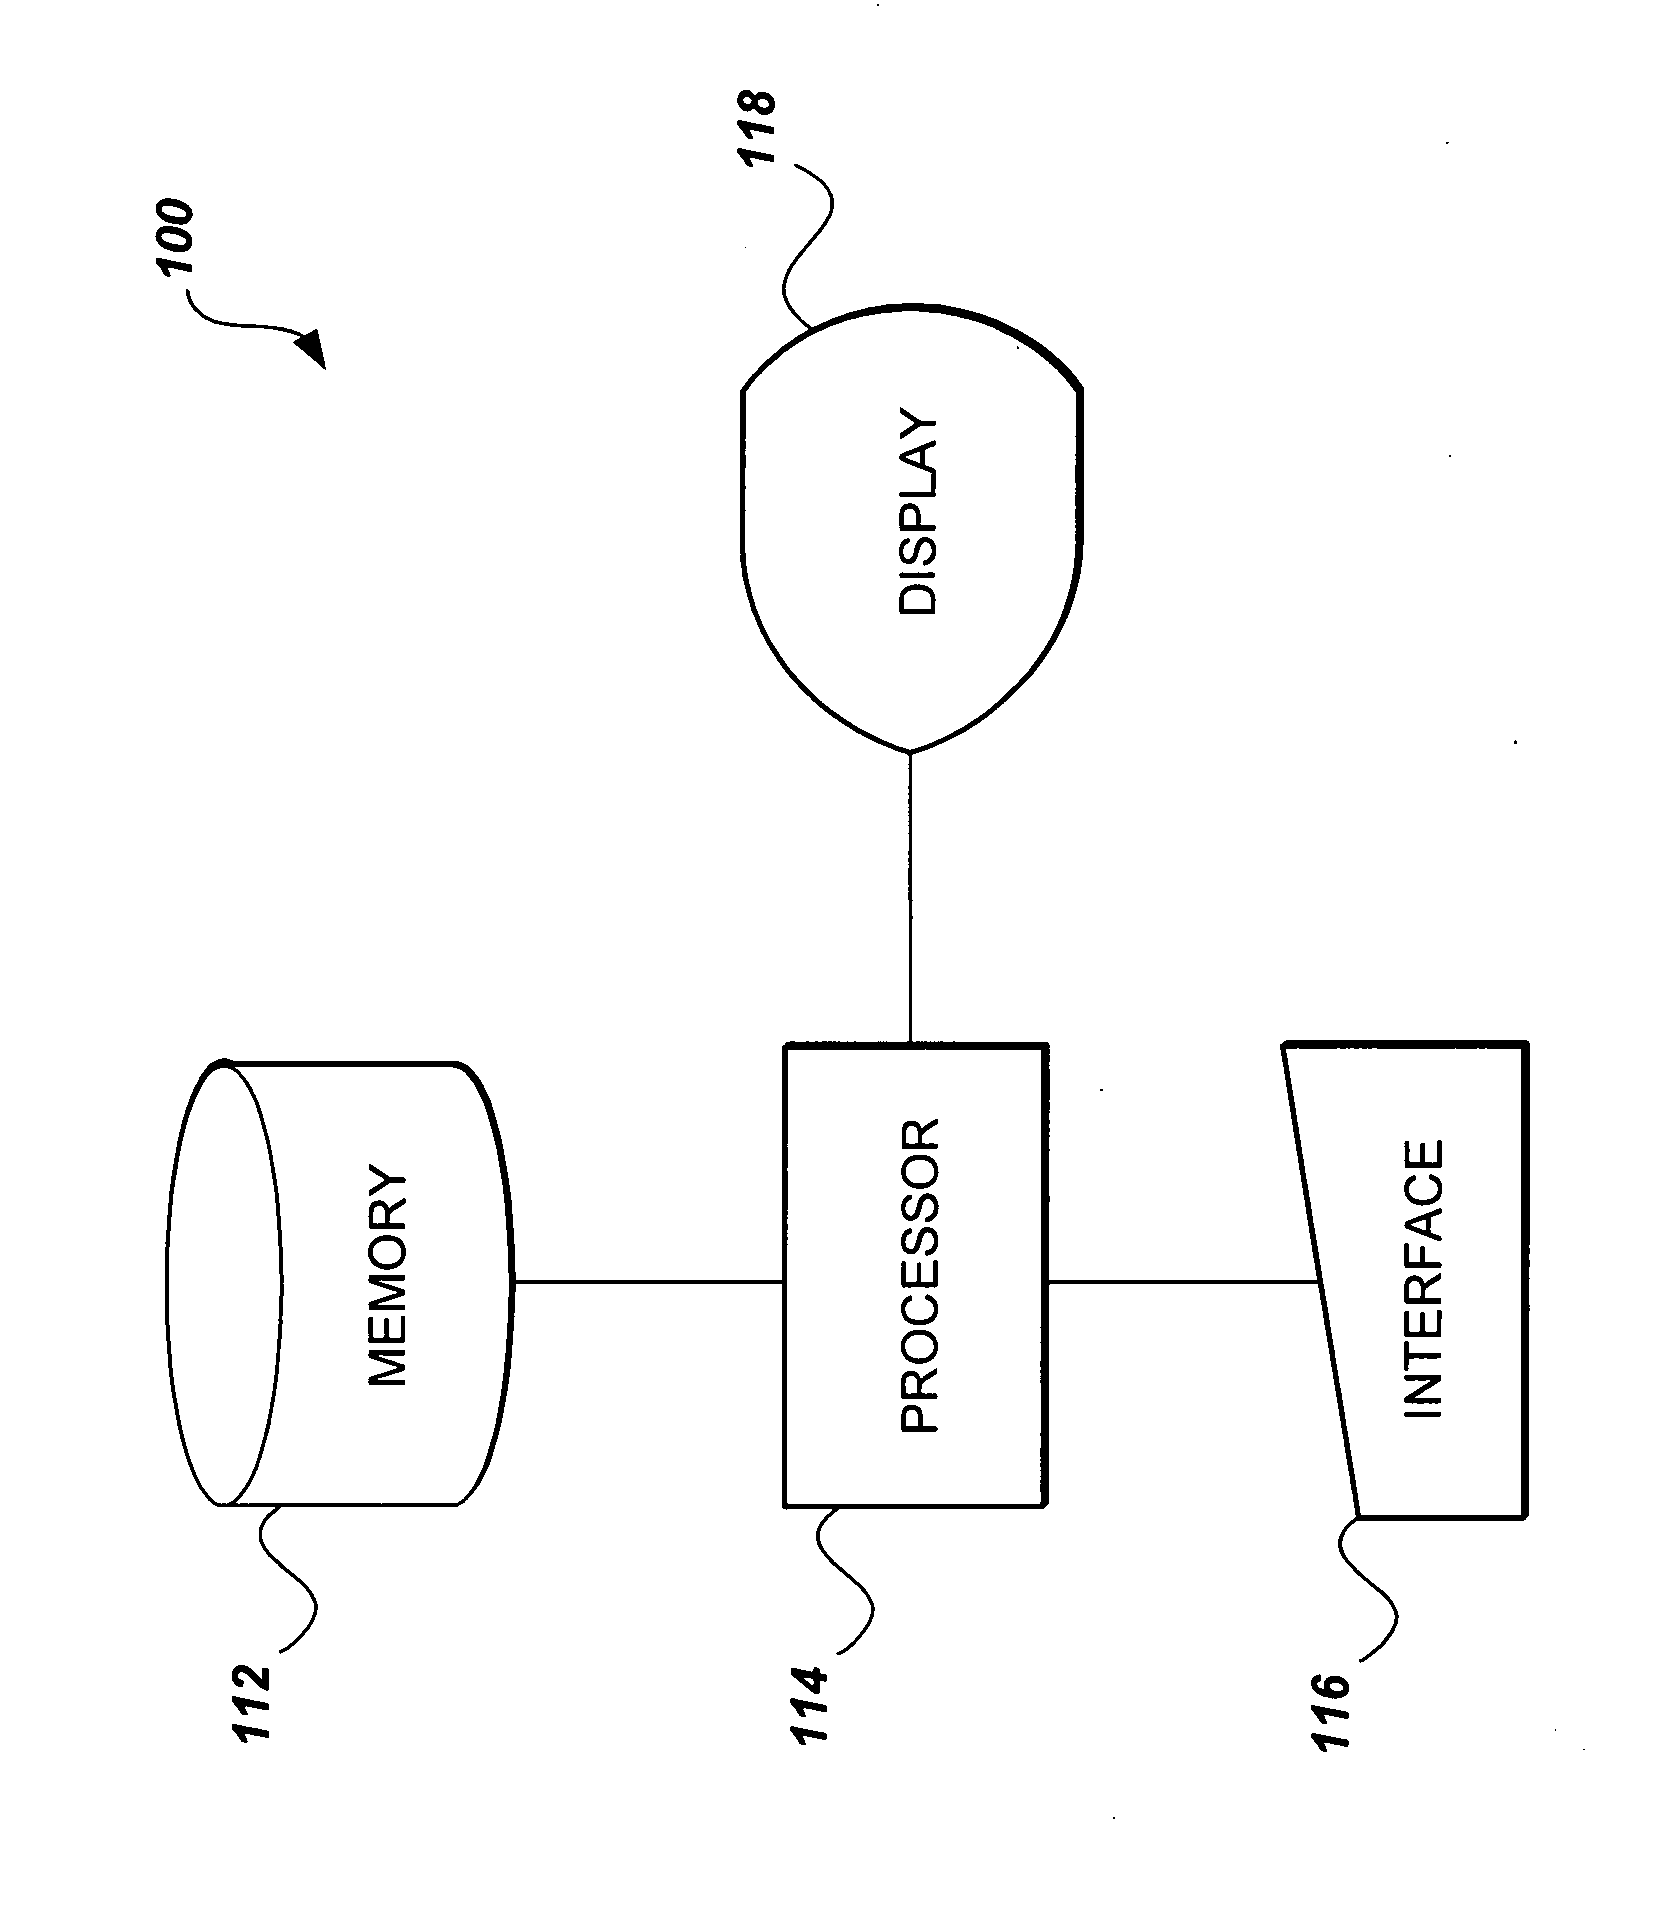 Method of performing elliptic polynomial cryptography with elliptic polynomial hopping